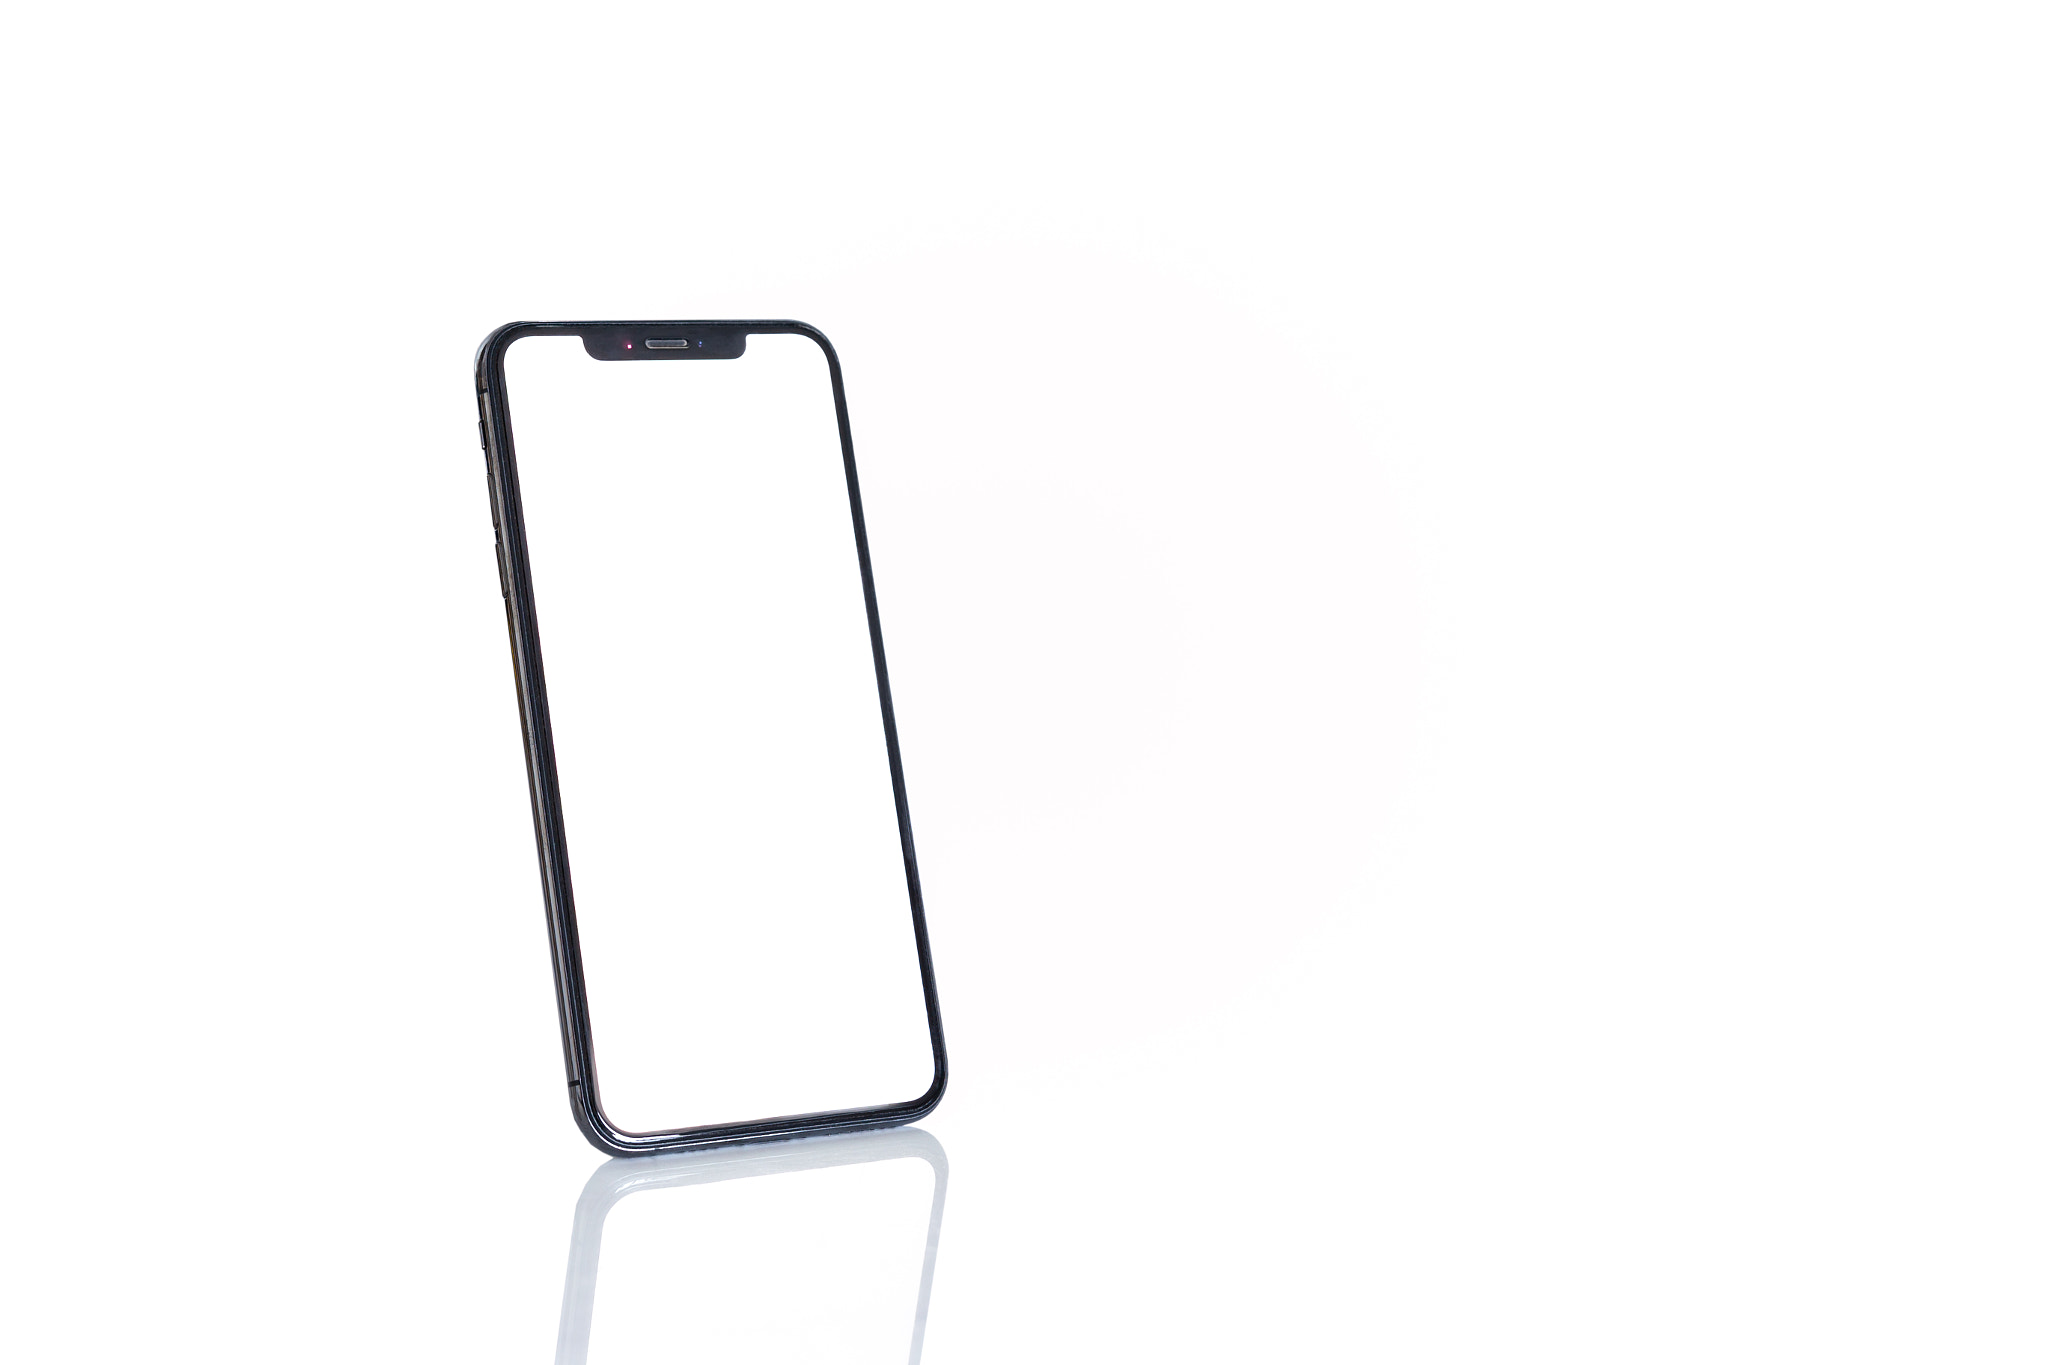 Black realistic smart phone mockup isolated in white background.